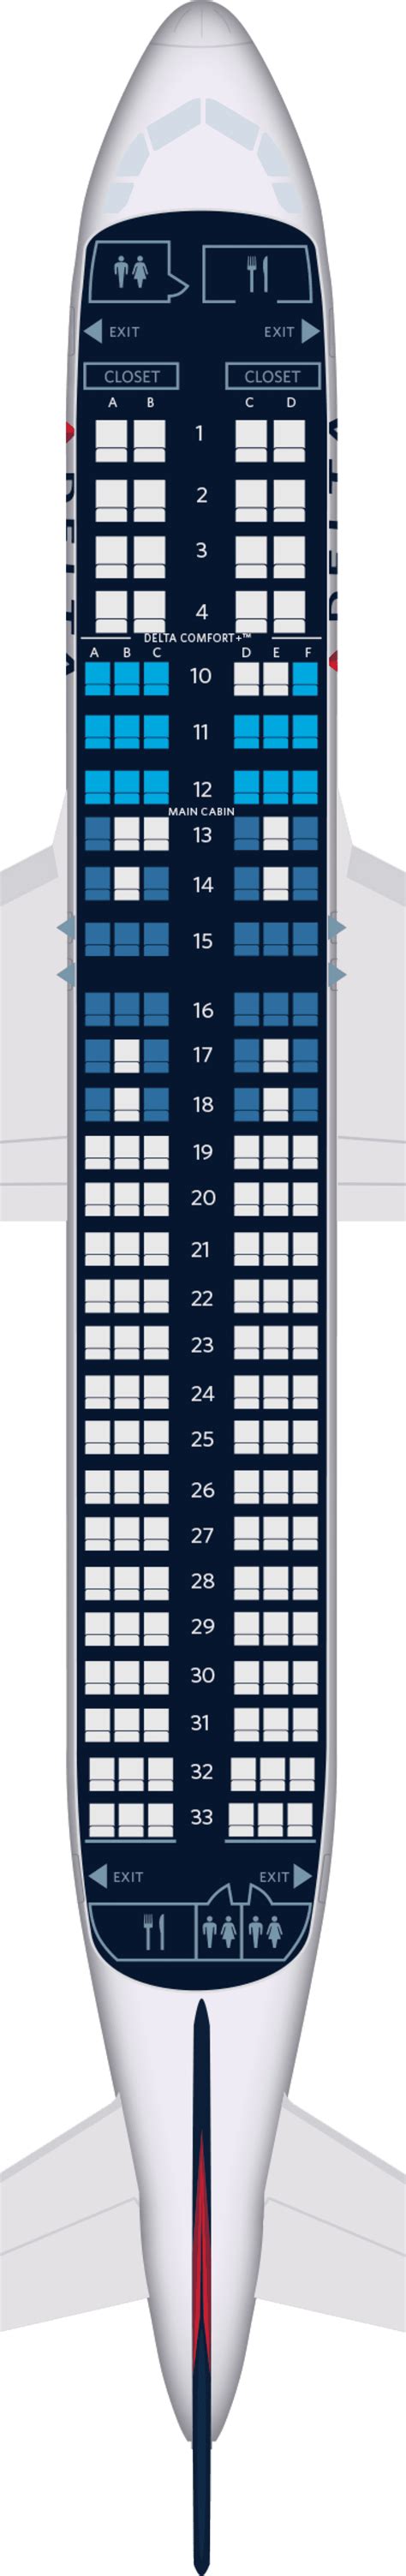 IndiGo Airbus A320 aircraft seat map IndiGo IndiGo uses hundreds of Airbus A320-200 planes with standard 180 passenger capacity seat map configuration. Because of its power, reliability, and low noise level the airline is utilizes Airbus A320 as the basic model for medium-haul routes.. 